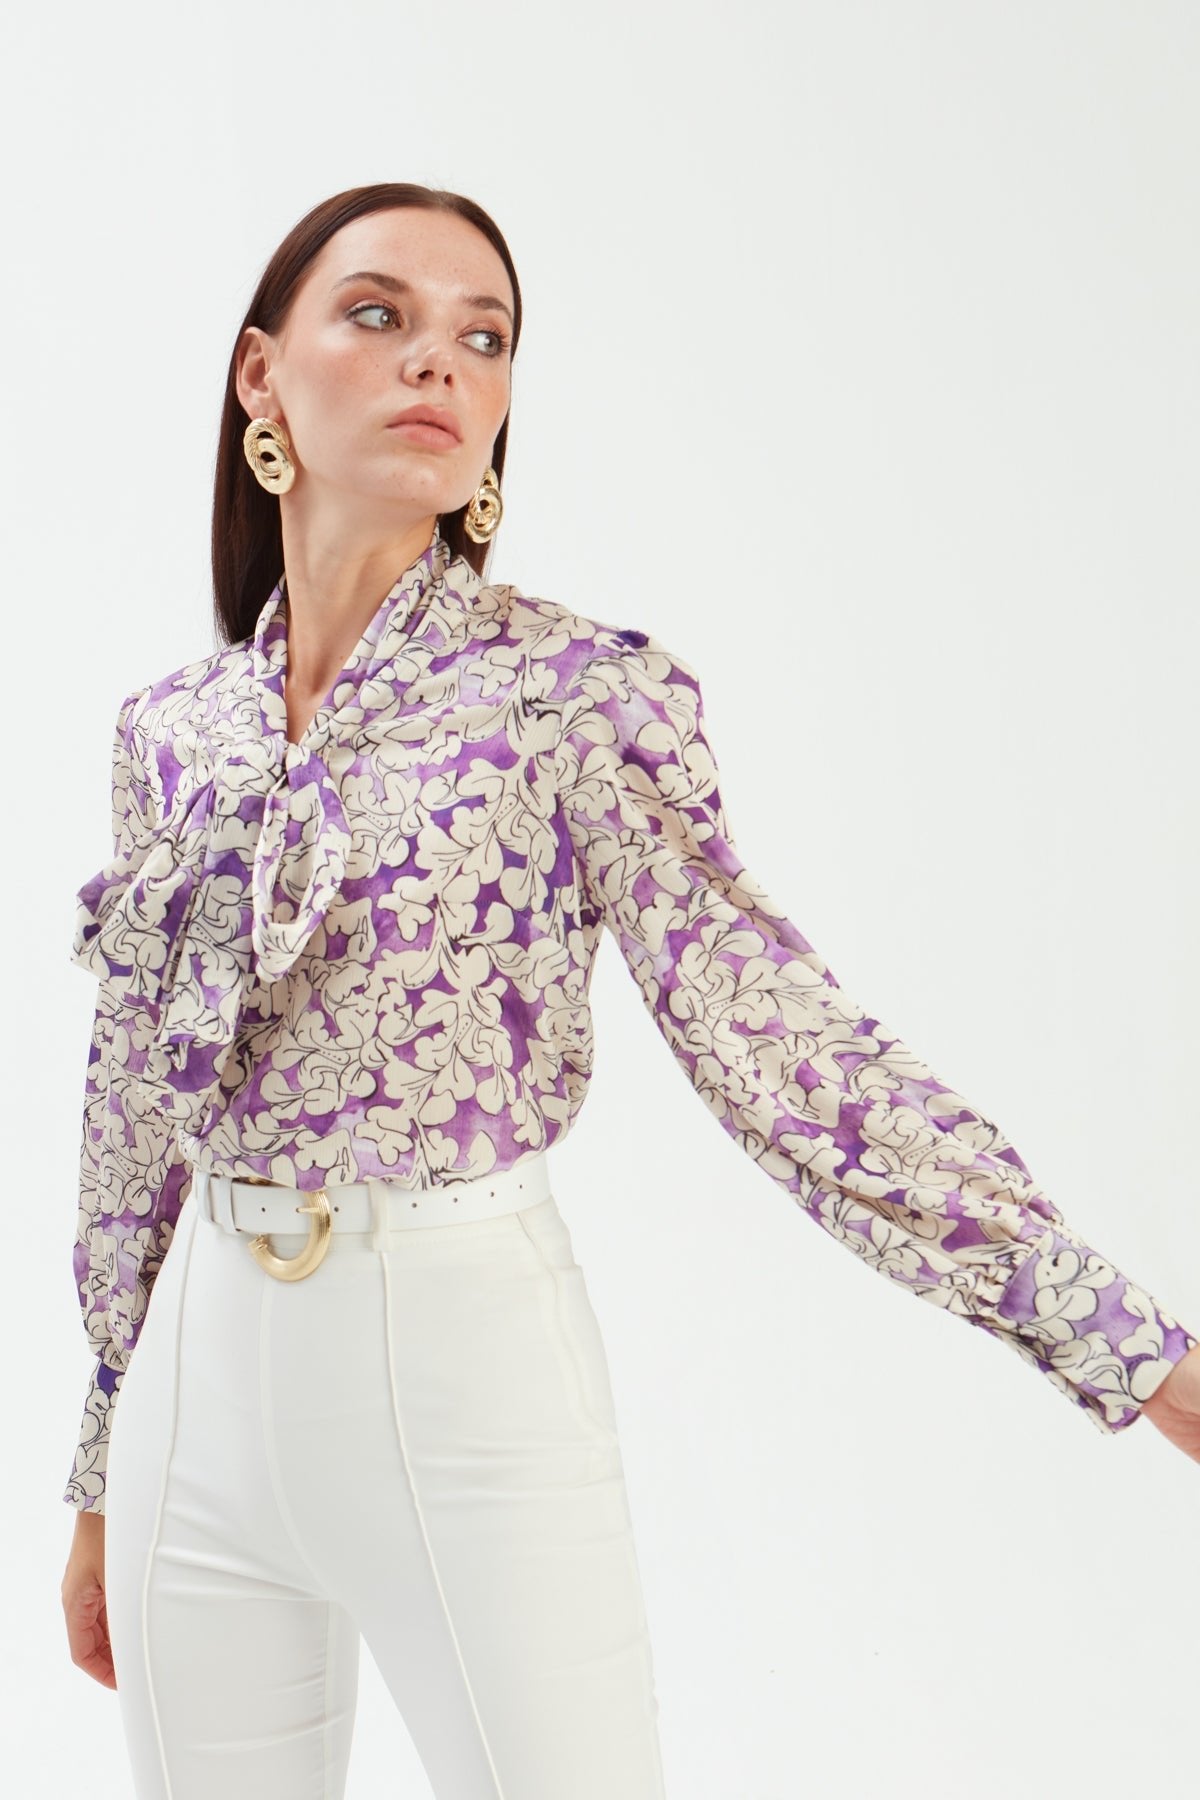 Bow Tie Collar Patterned Blouse - PURPLE - Top - LussoCA